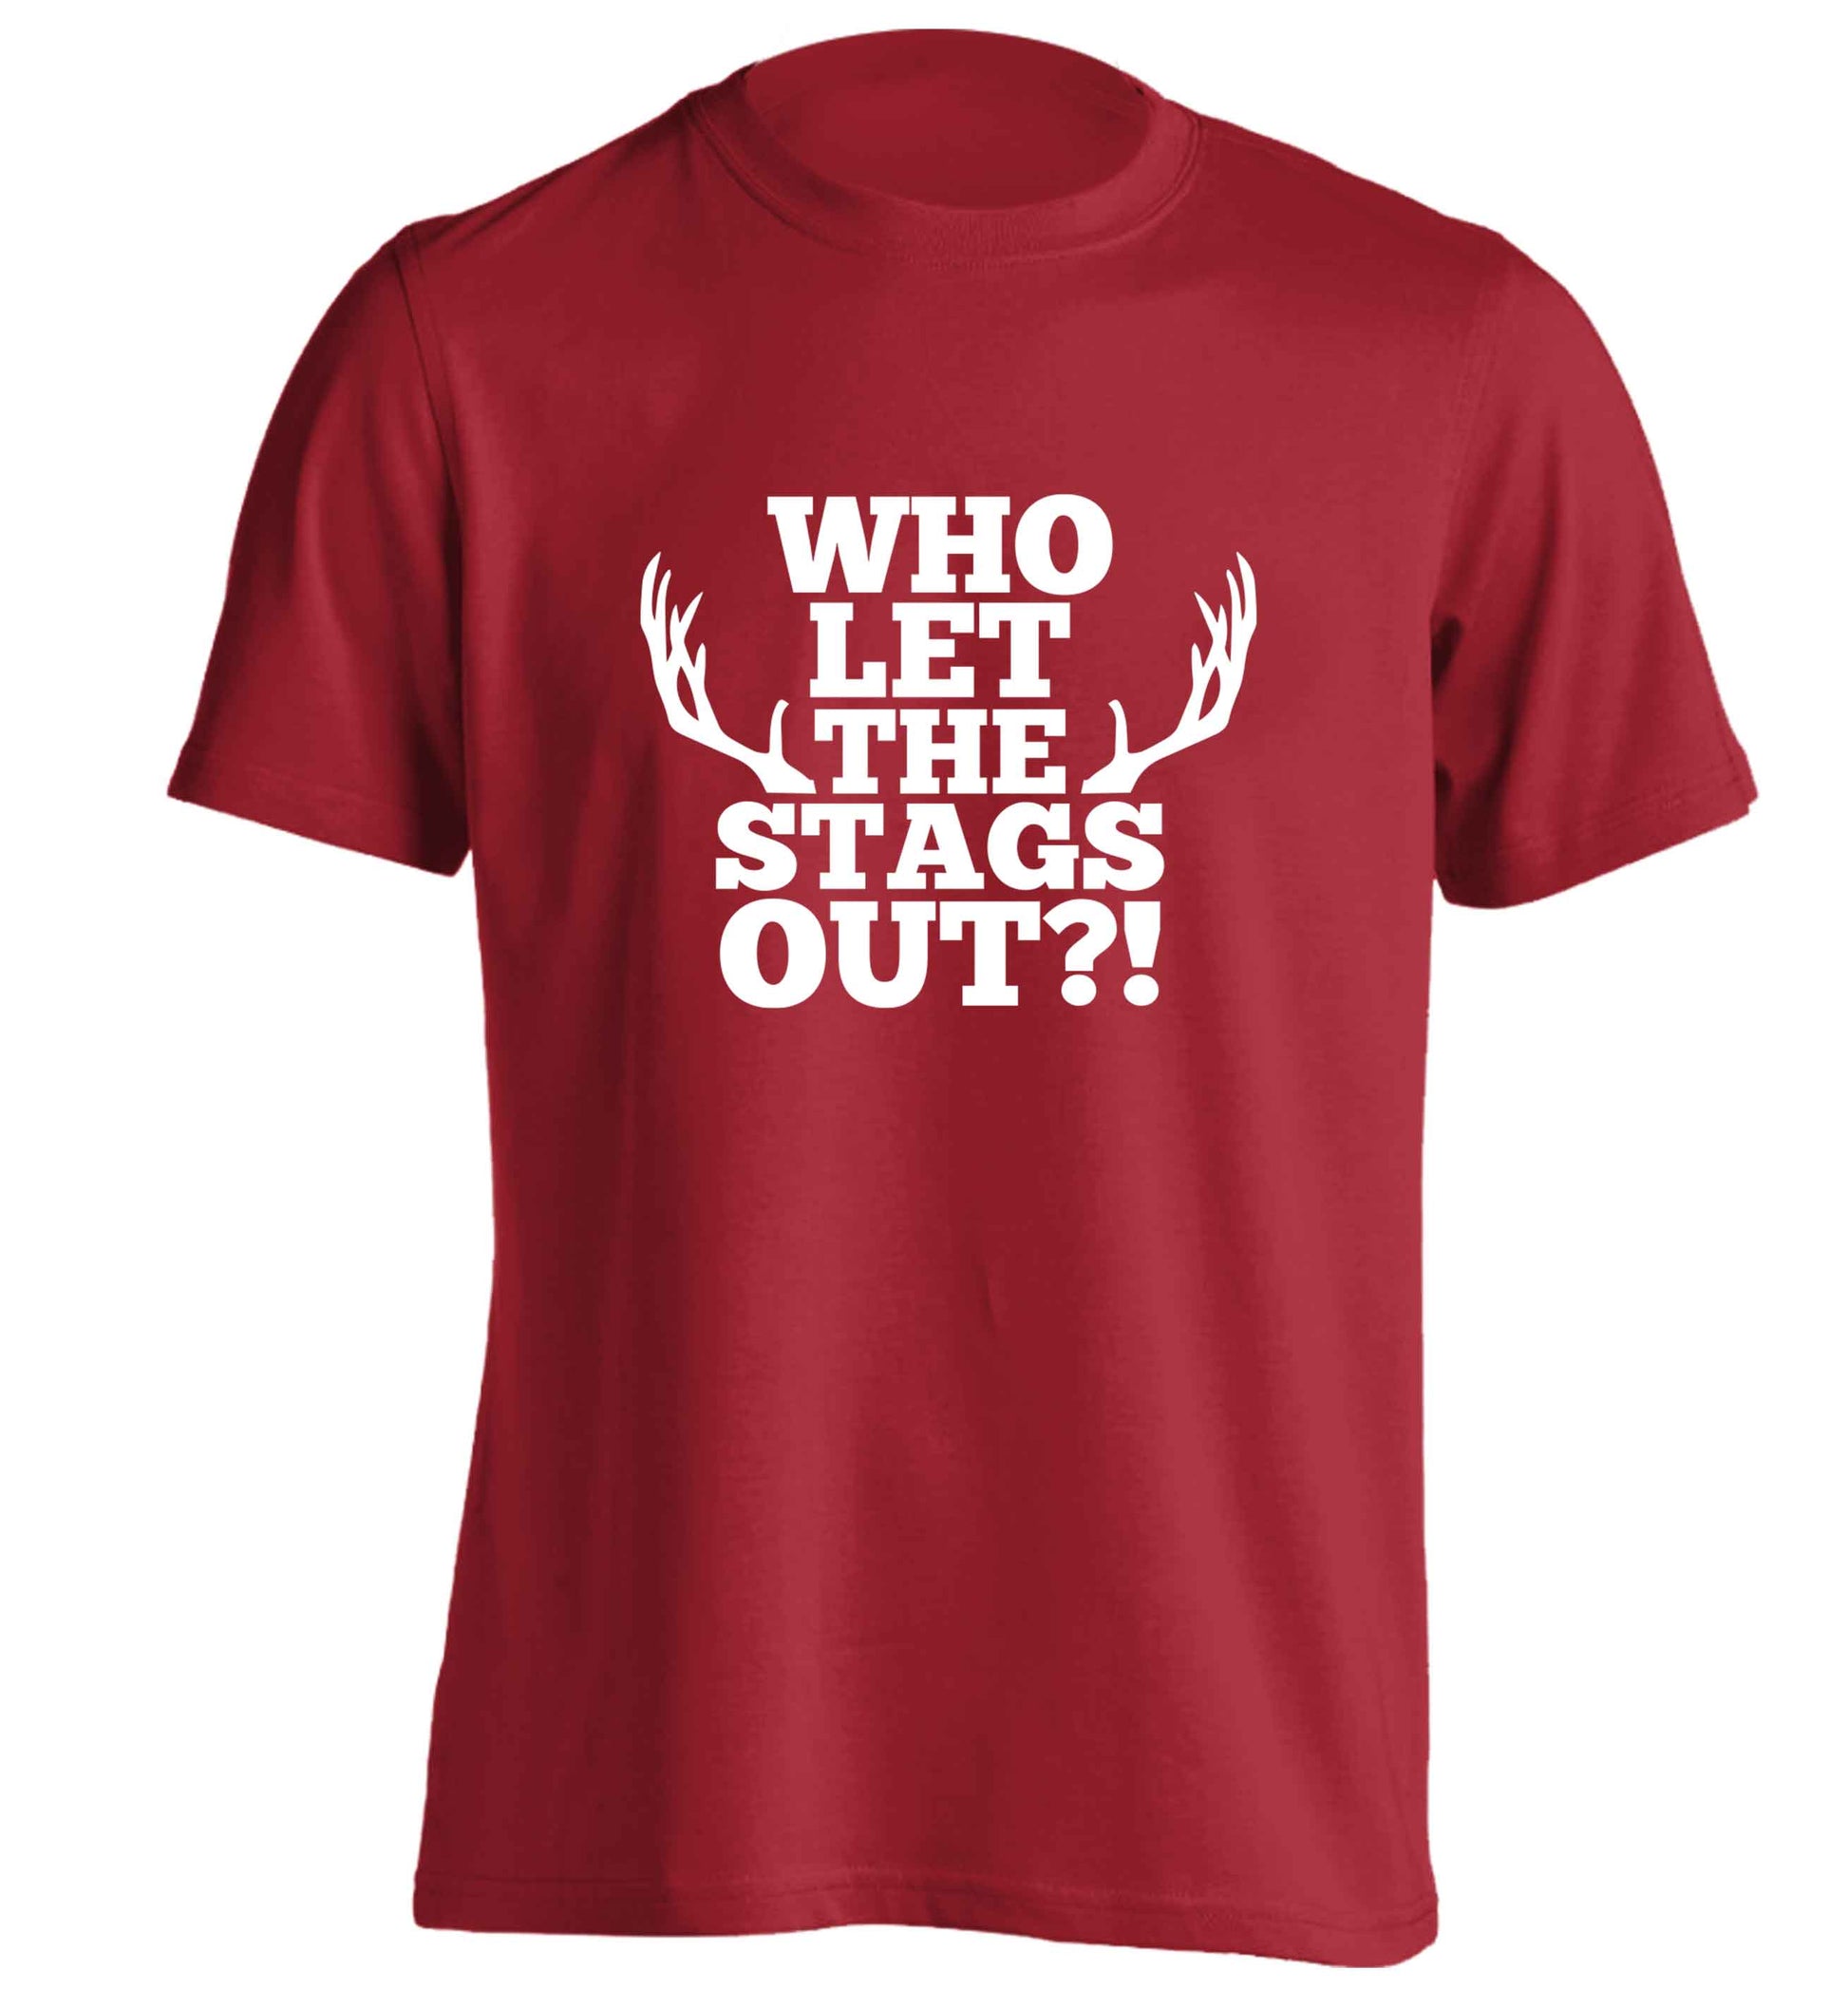 Who let the stags out adults unisex red Tshirt 2XL